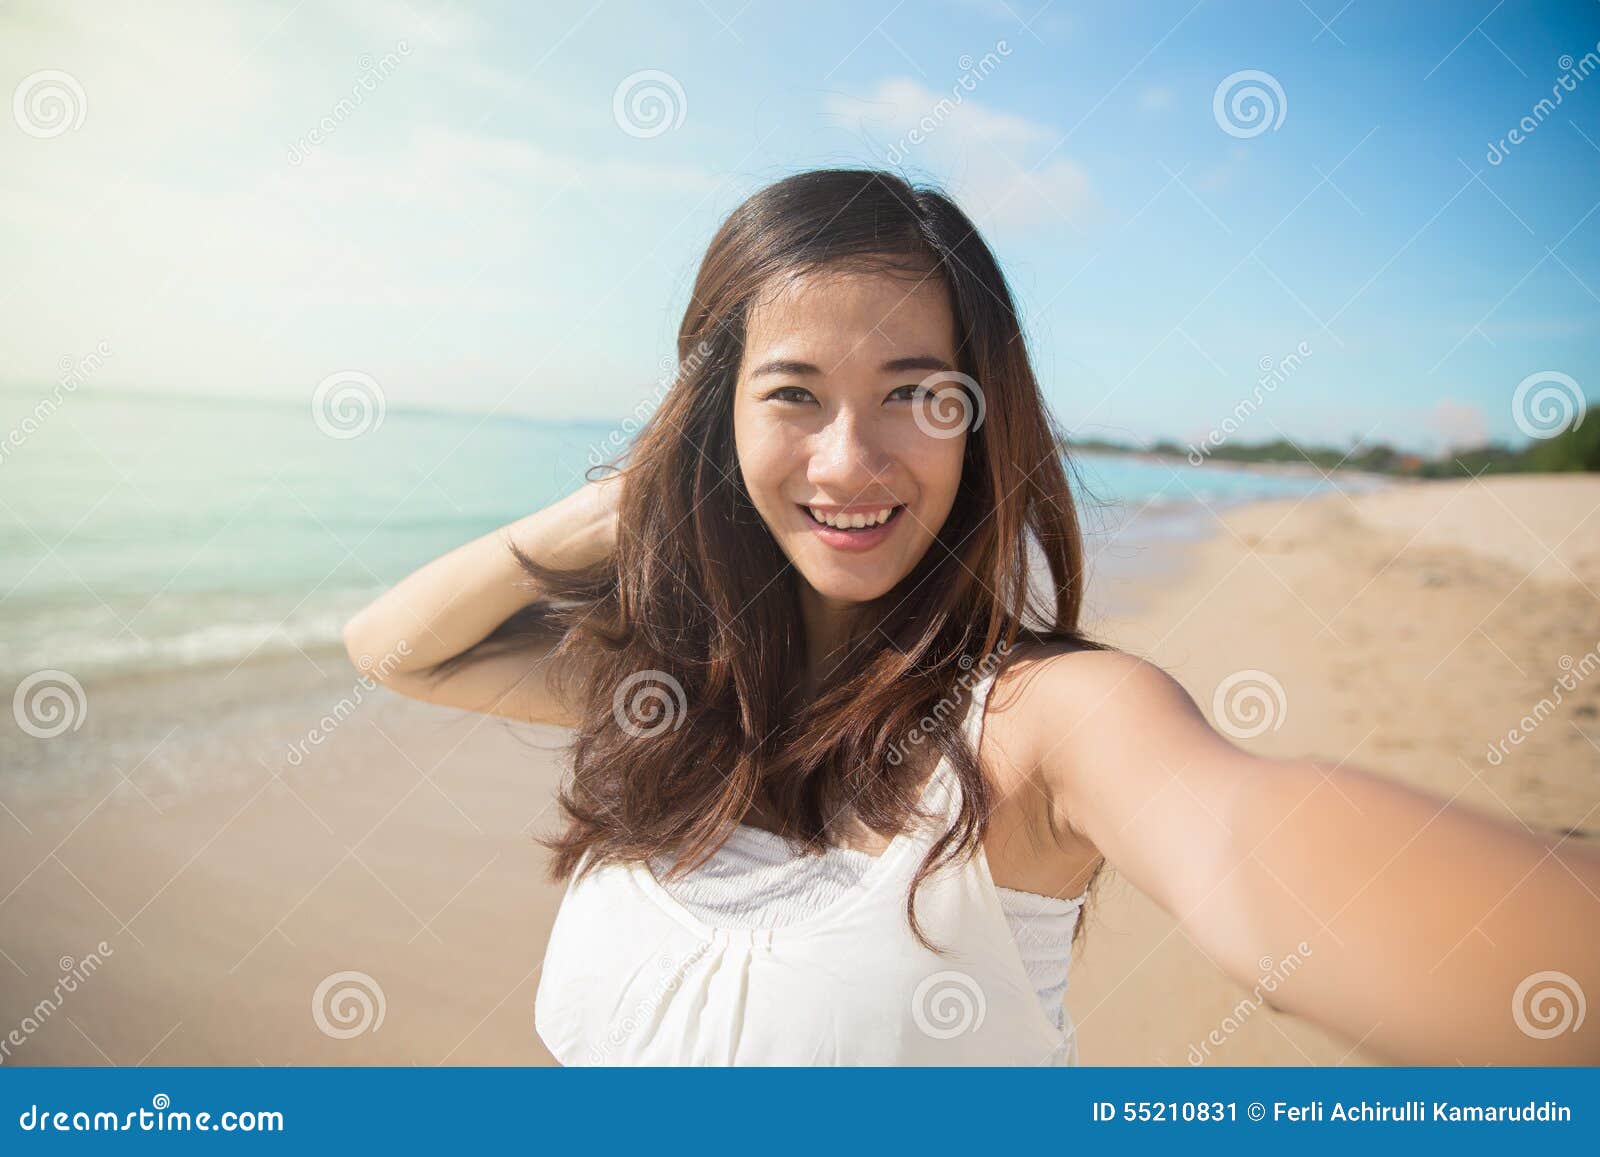 3,145,902 Happy Young Woman Smile Stock Photos - Free & Royalty